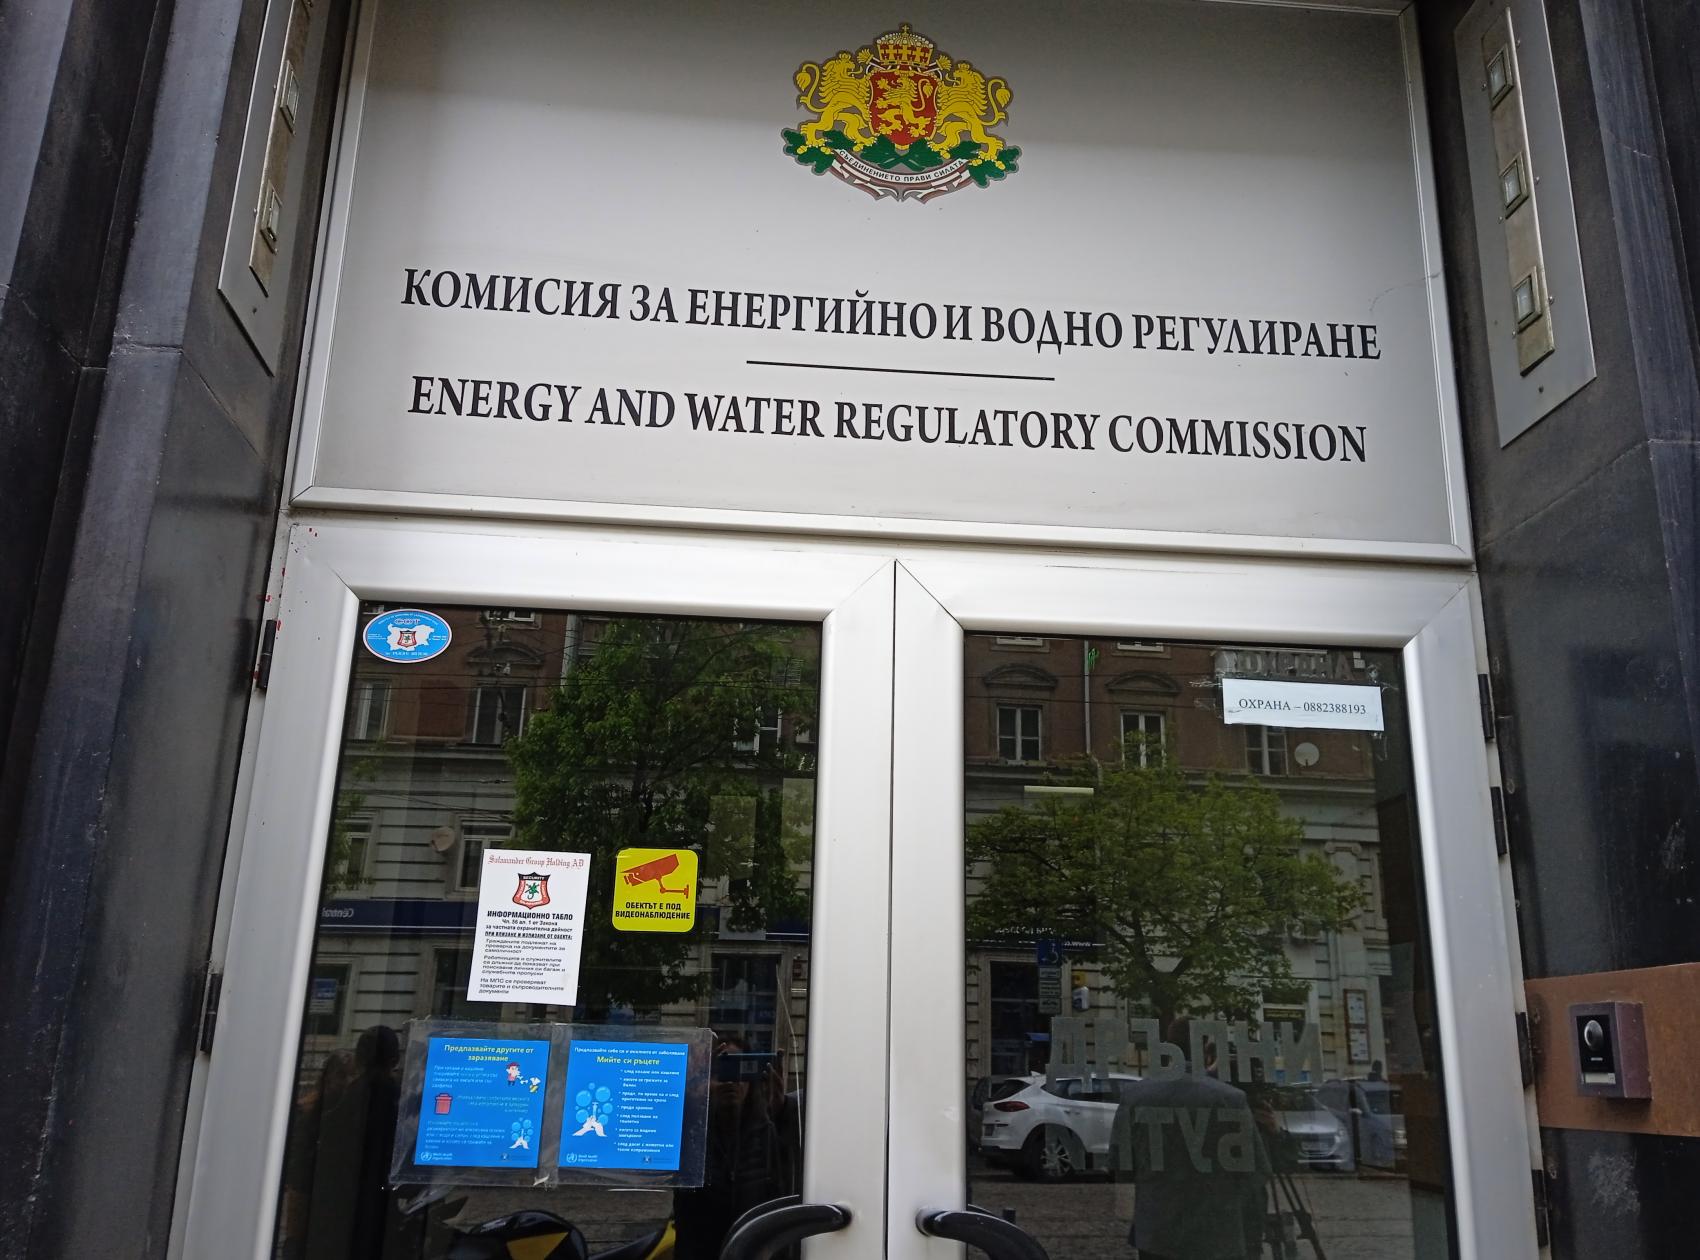 The Commission for Energy and Water Regulation (EWRC) will hold